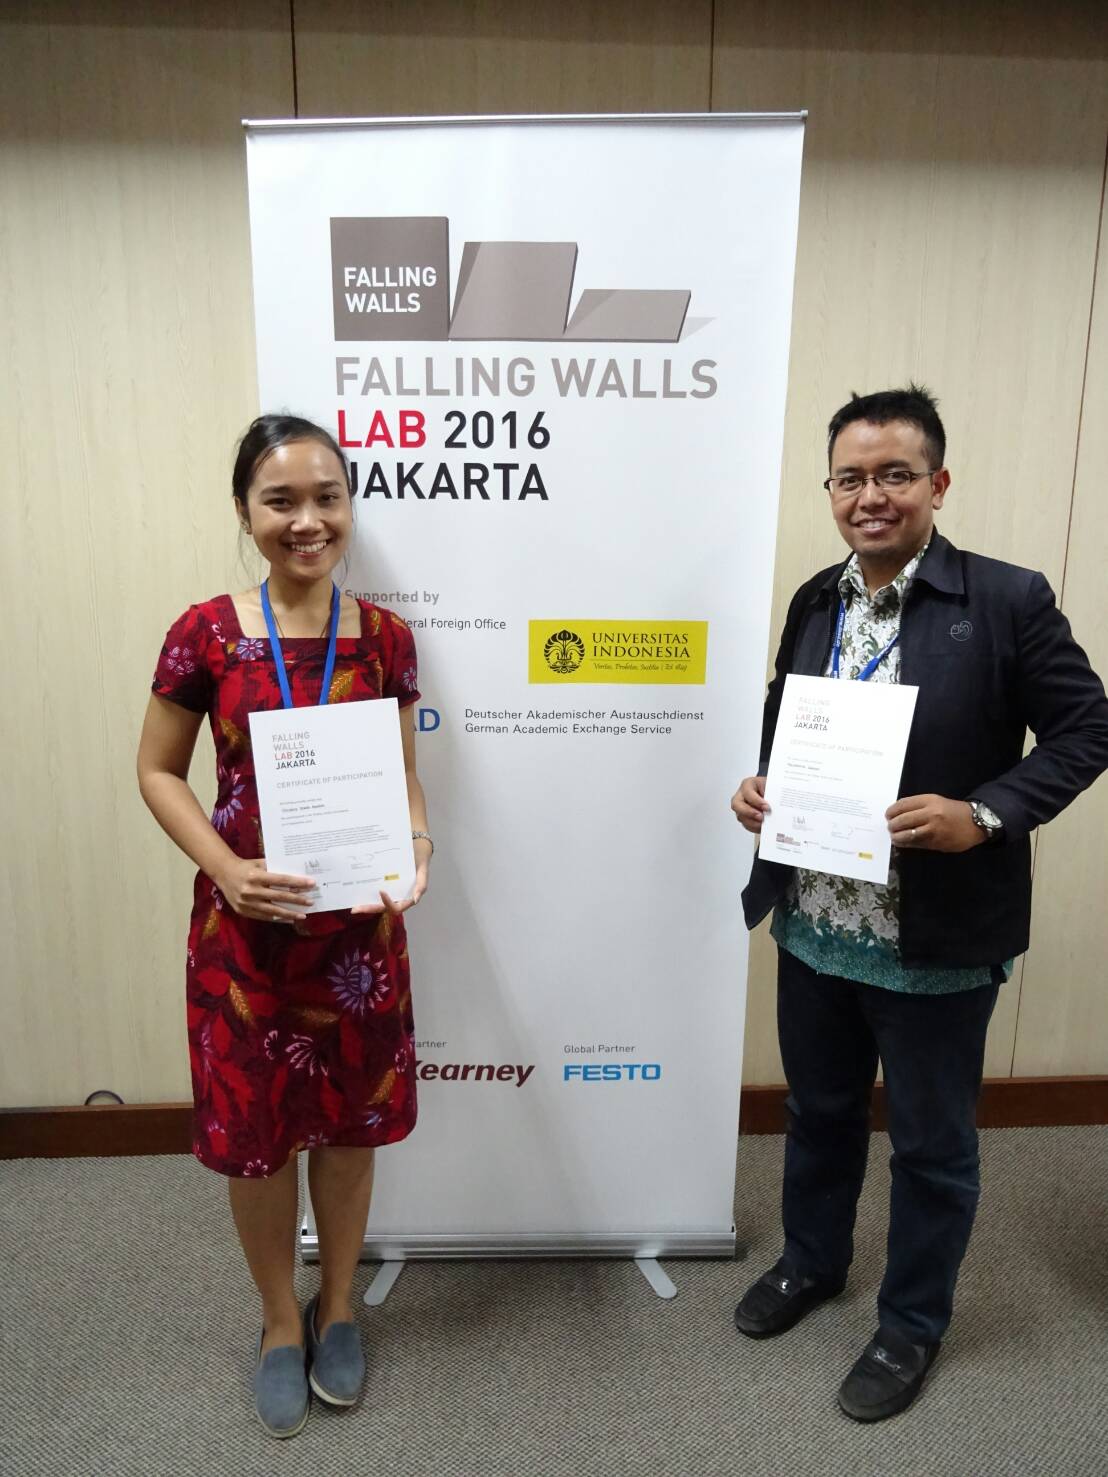 SGU Student and Lecturer Rose as Finalists at Falling Walls Lab 2016